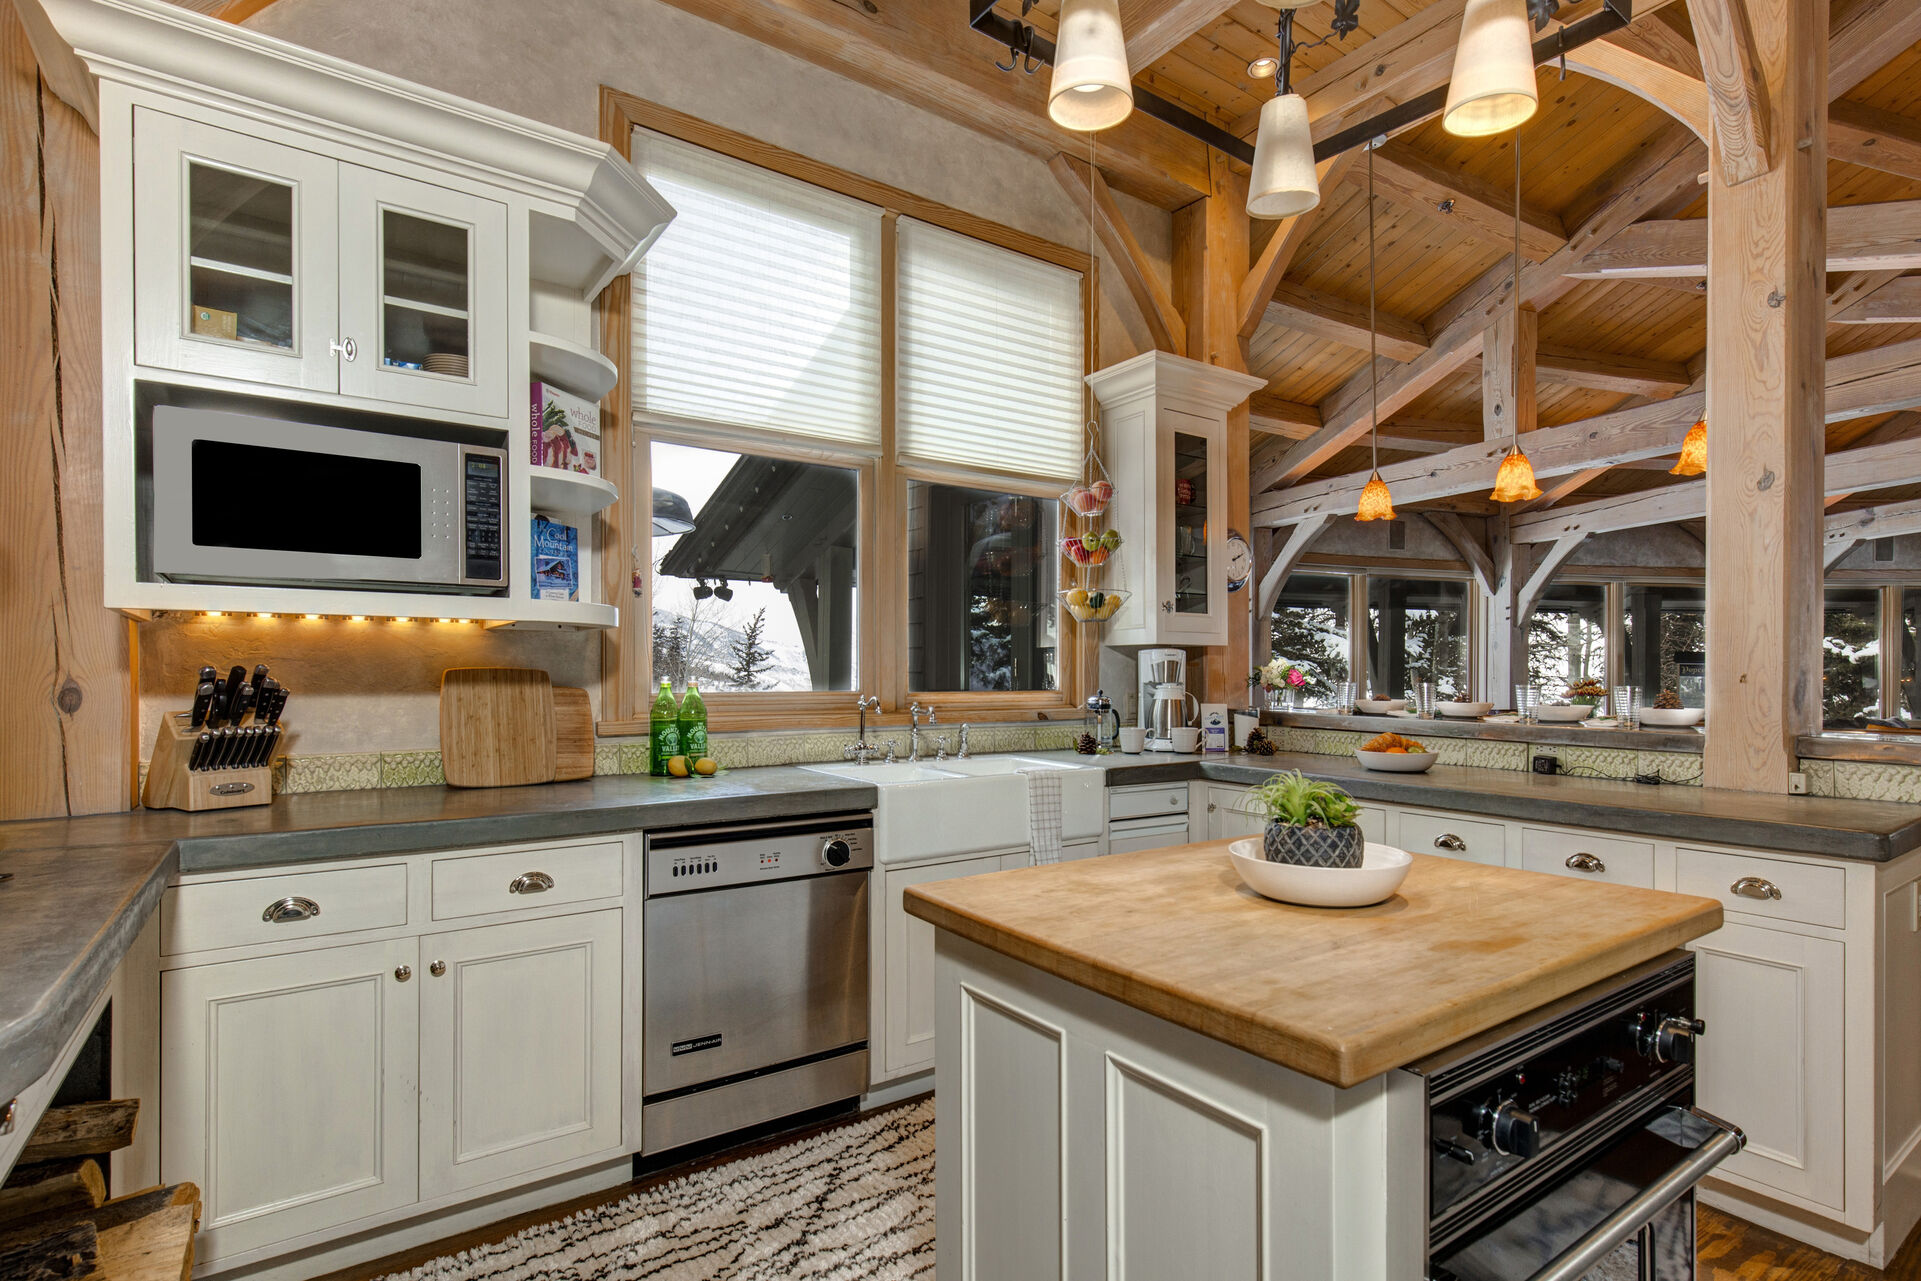 Gourmet Kitchen with Viking appliances, modern stone countertops, butcher block center island, wood burning fireplace, and additional prep kitchenette with private entrance and secondary appliances